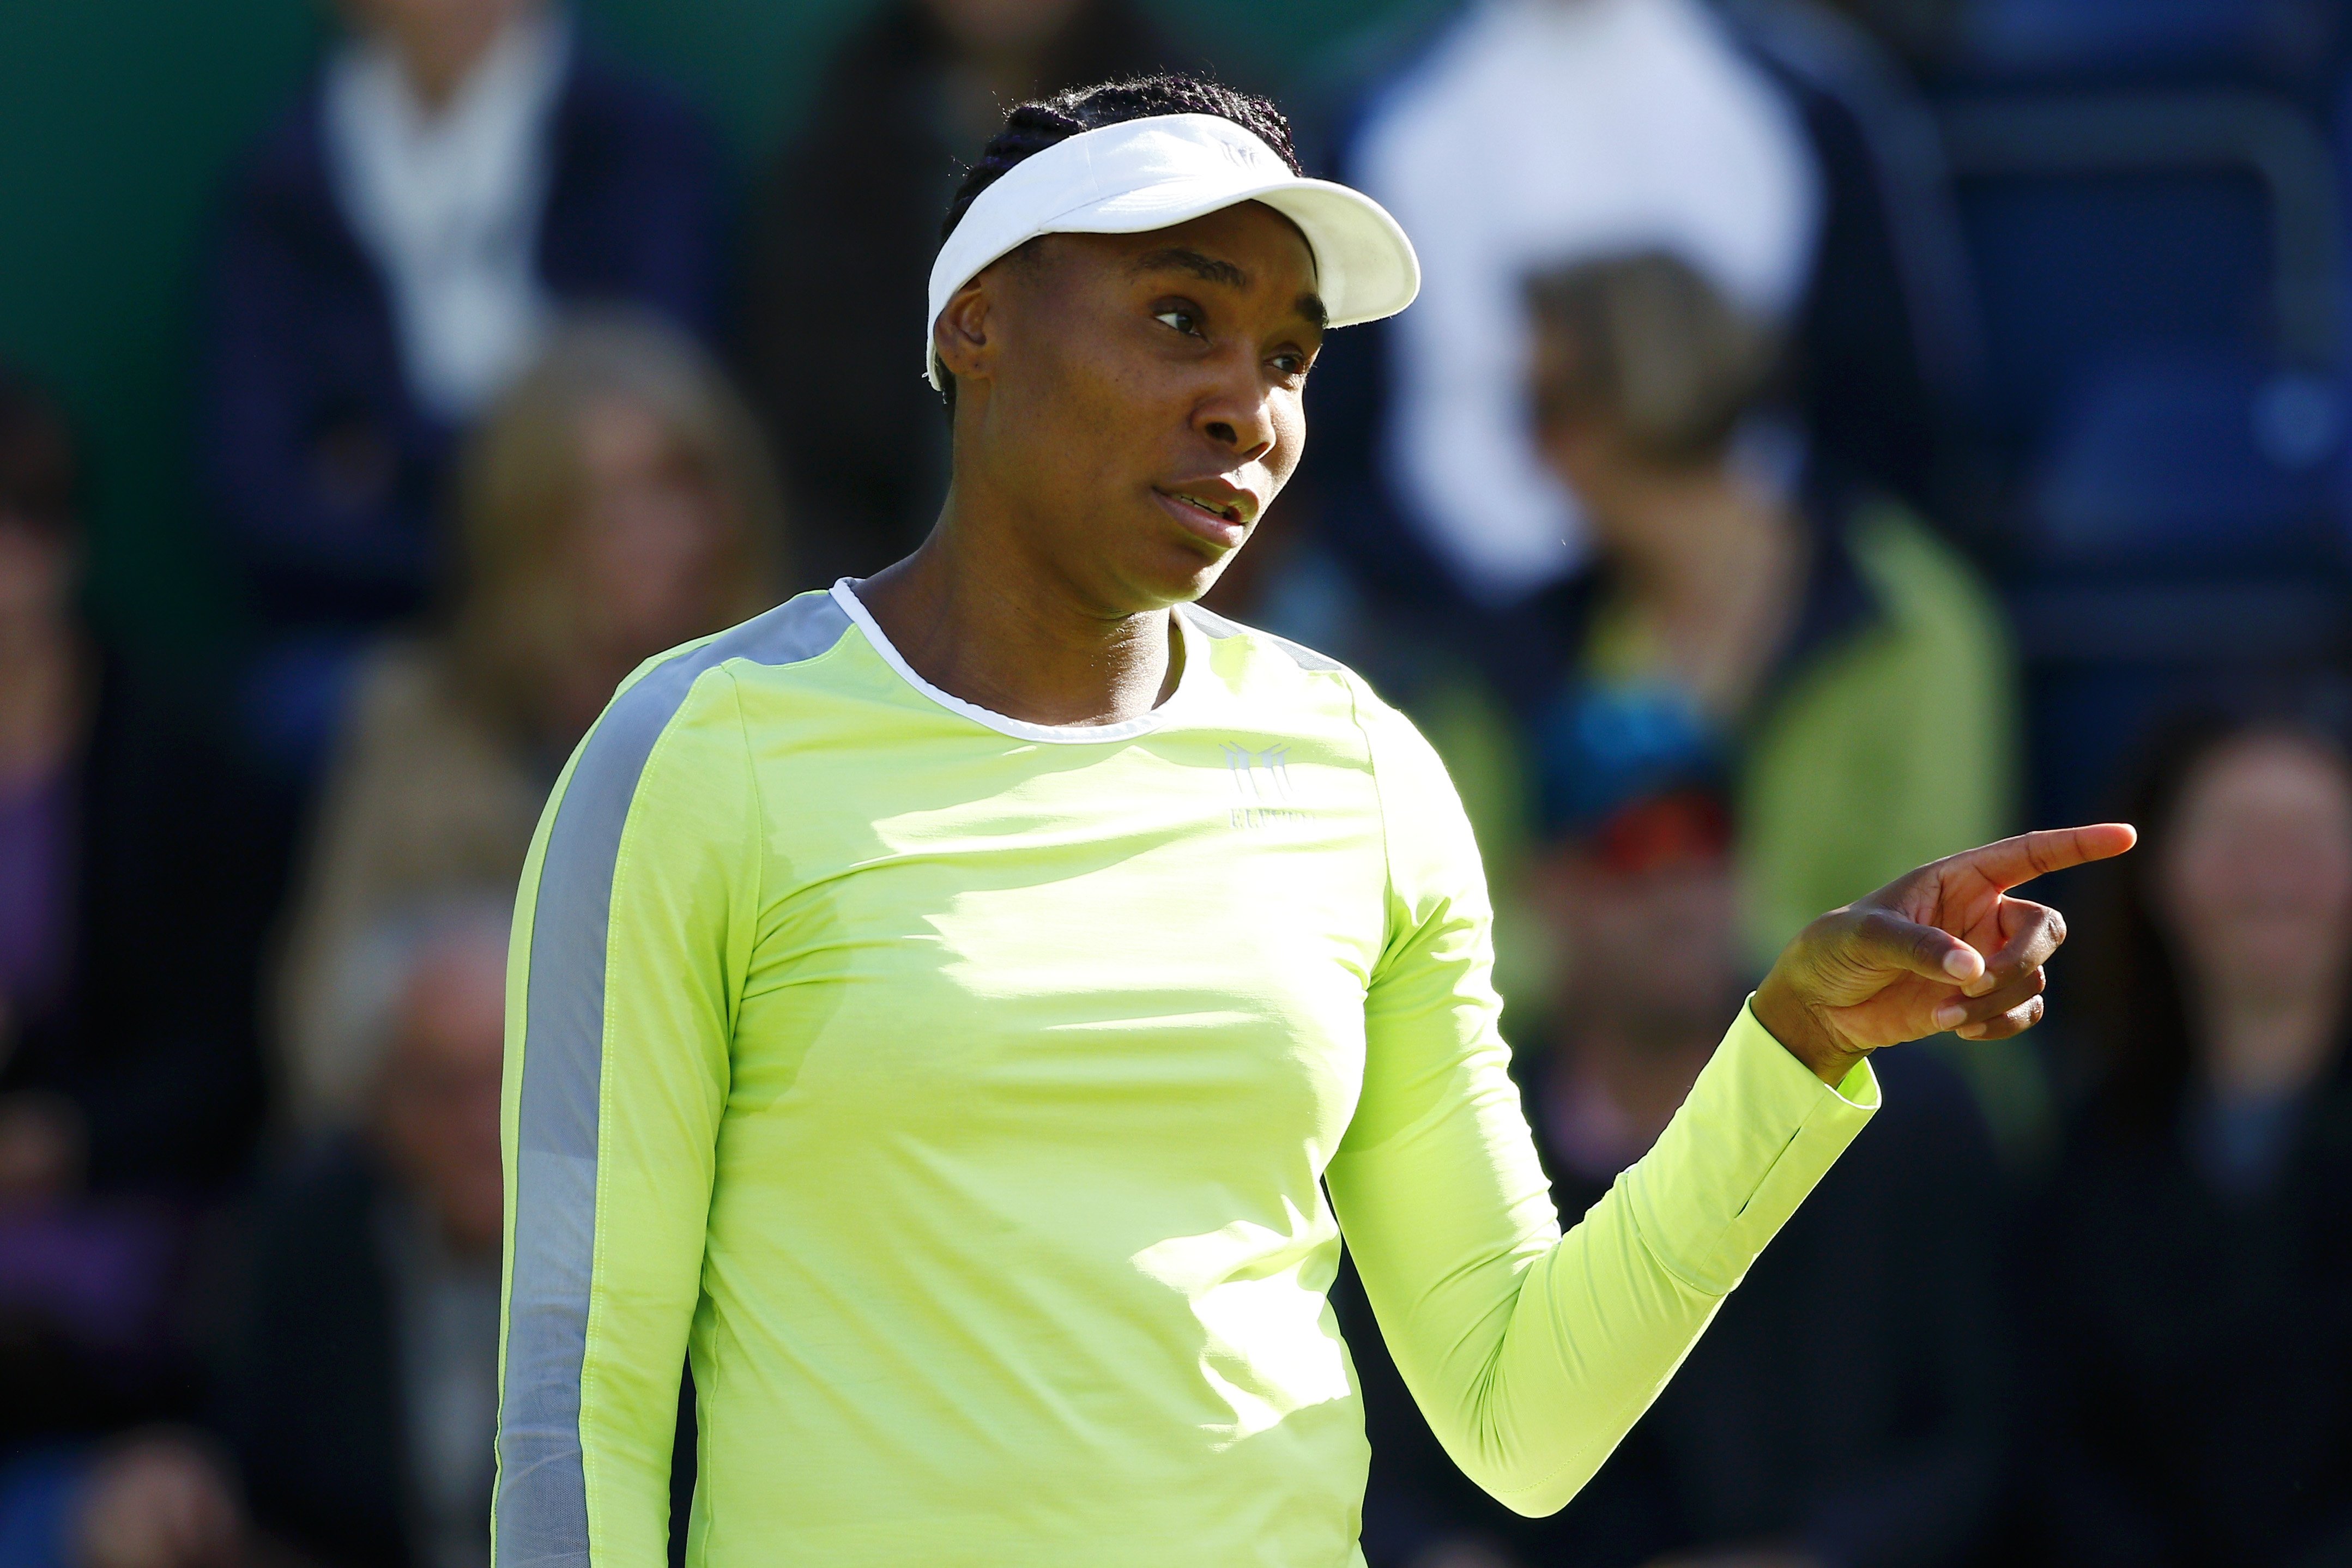 Venus Williams plays at the Nature Valley Classic at Edgbaston Priory Club on June 20, 2019 in Birmingham, United Kingdom  | Photo: Getty Images